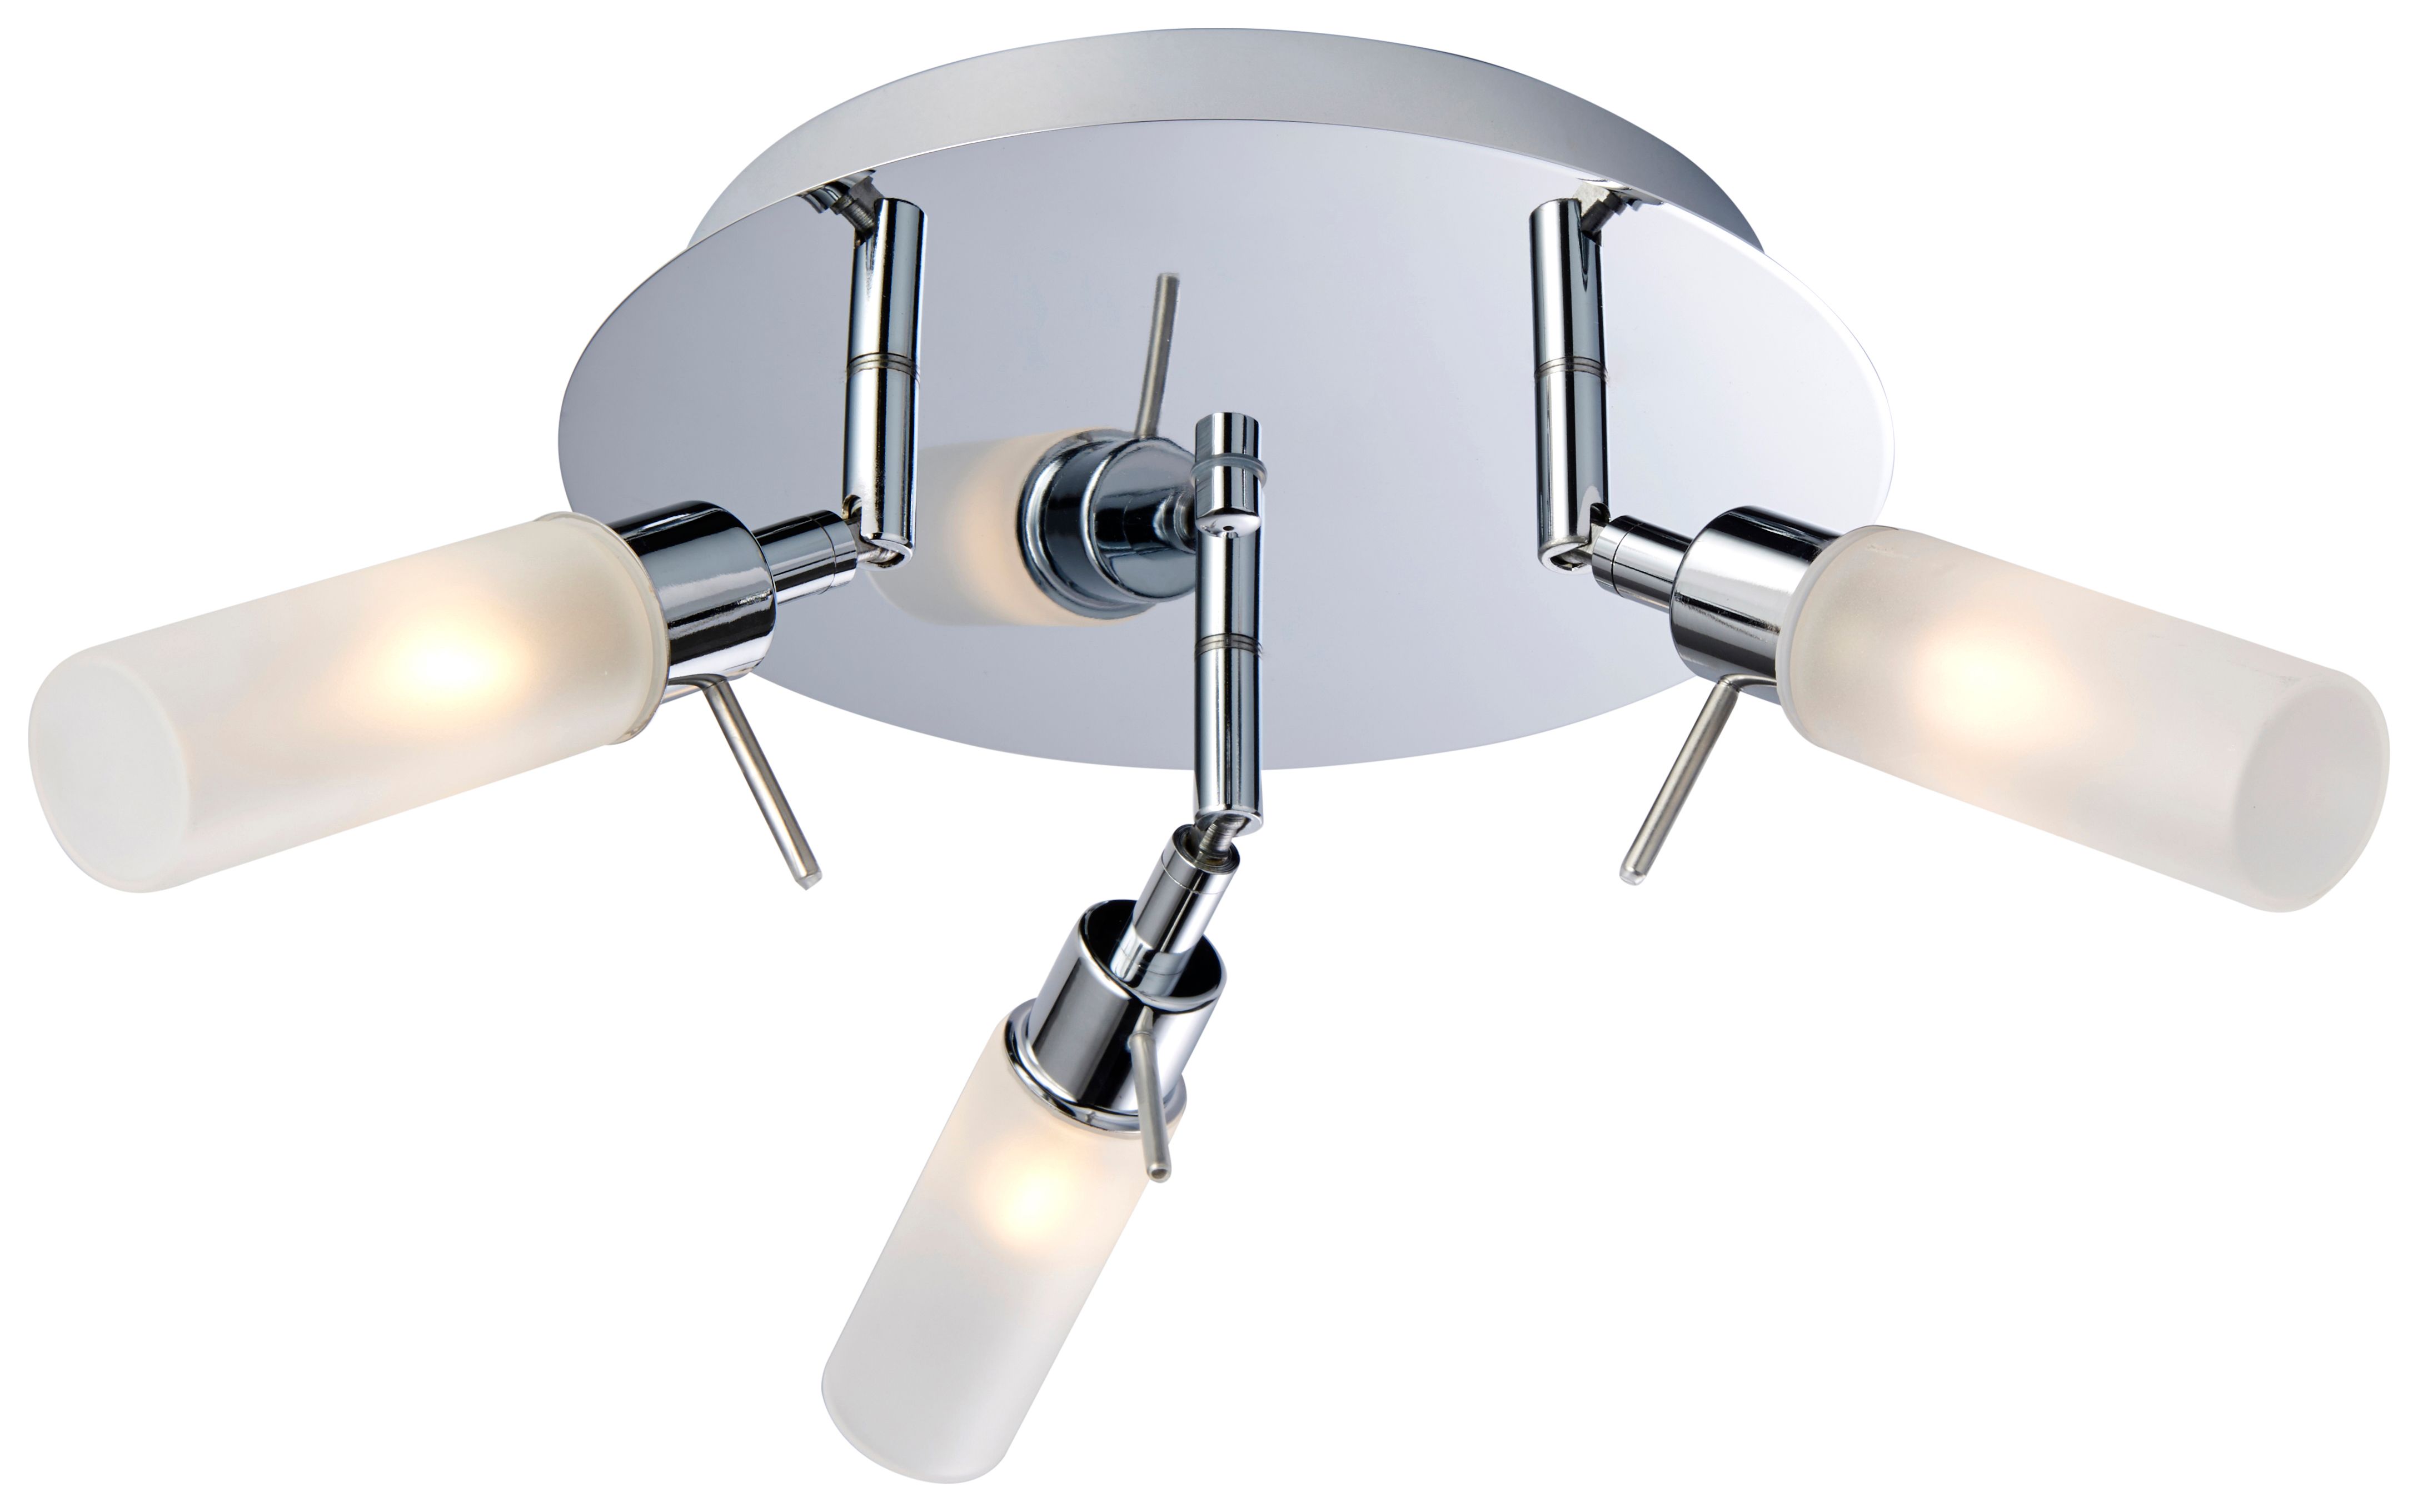 Image of Saxby IP44 Perle Bathroom 3 Light Plate LED Spotlight - Chrome with Opal Polycarbonate Shades